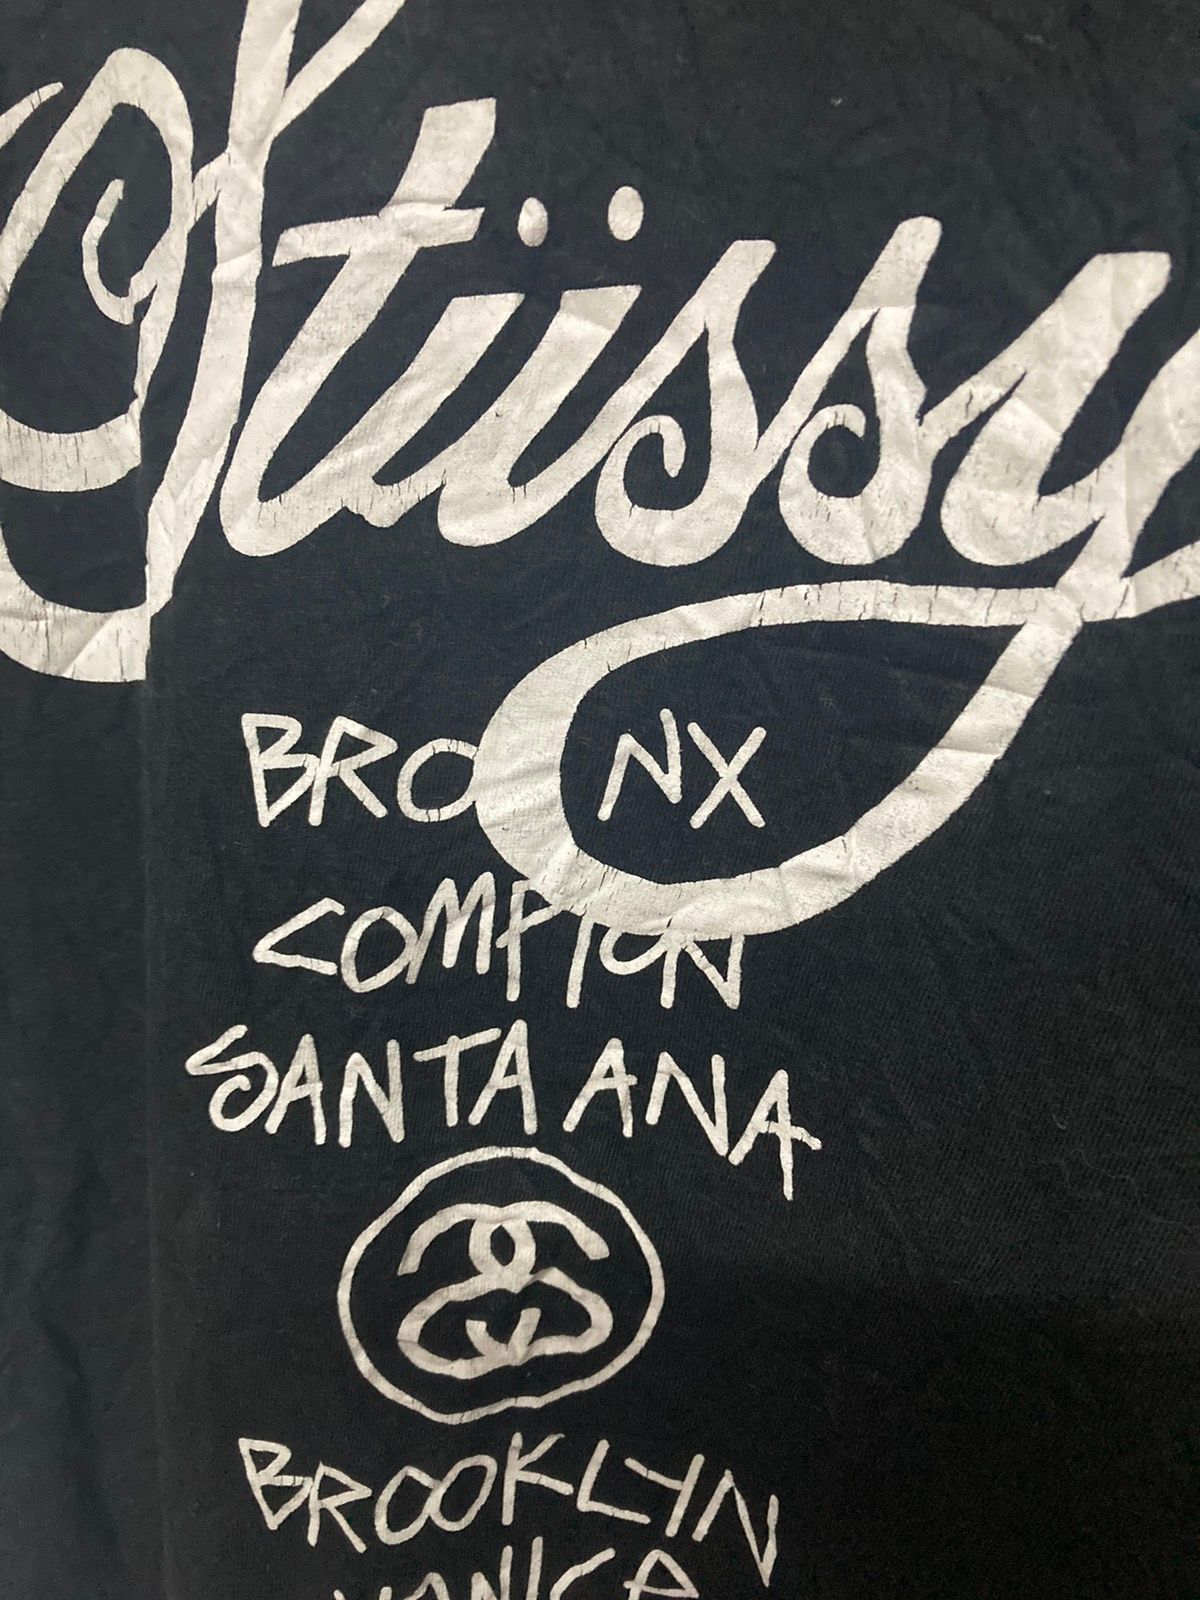 Stussy Tour Shirt For Women in XL size - 4